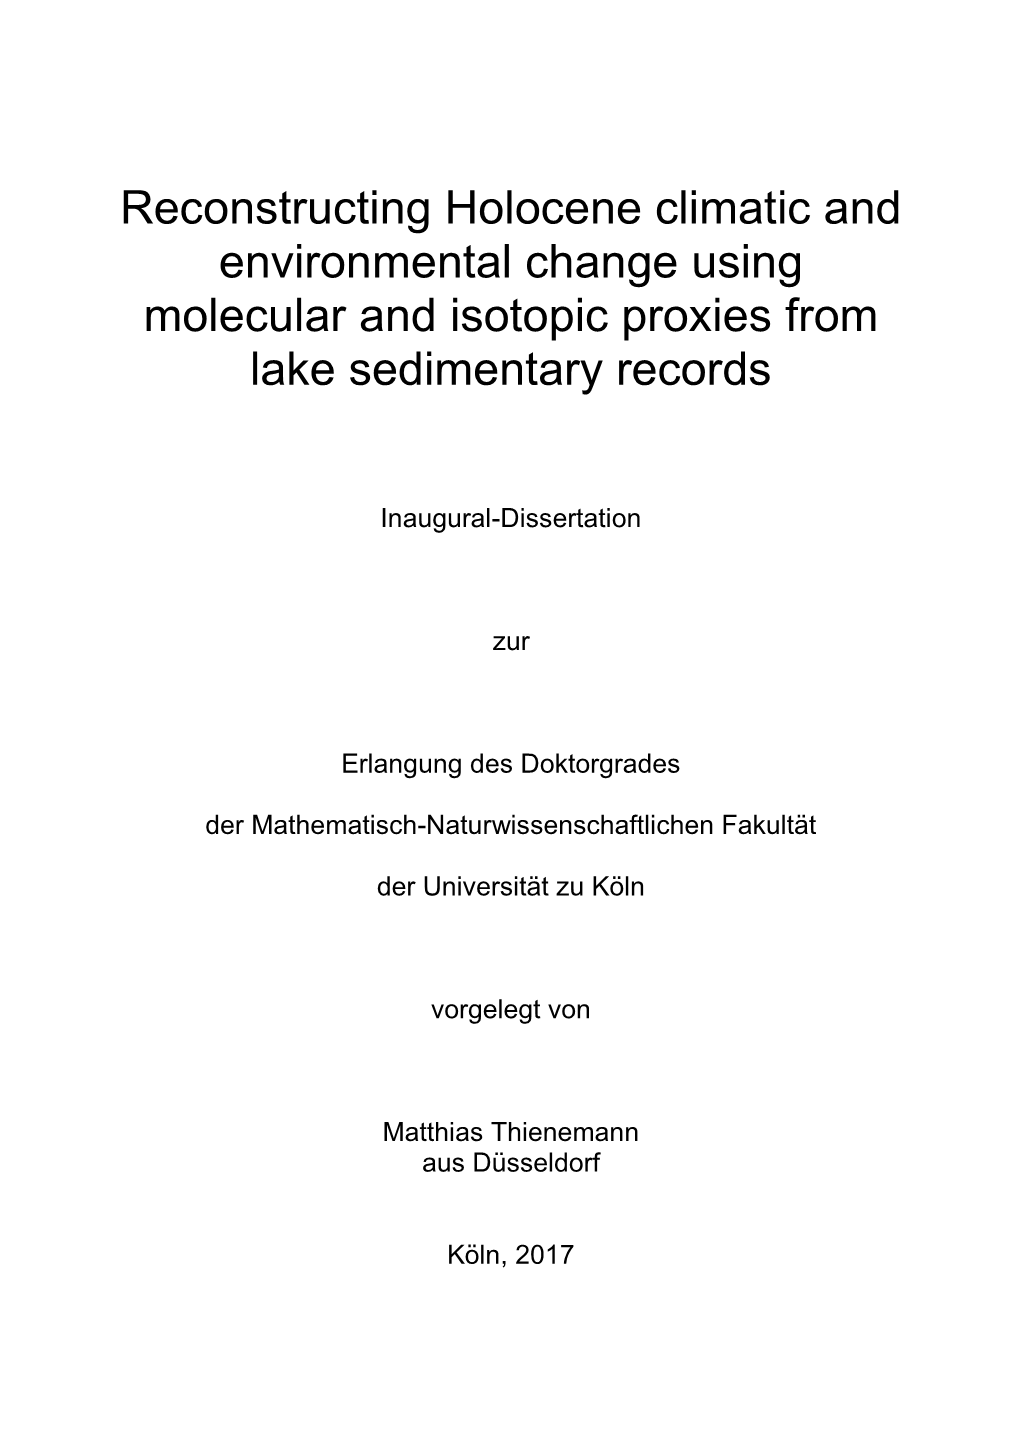 Reconstructing Holocene Climatic and Environmental Change Using Molecular and Isotopic Proxies from Lake Sedimentary Records